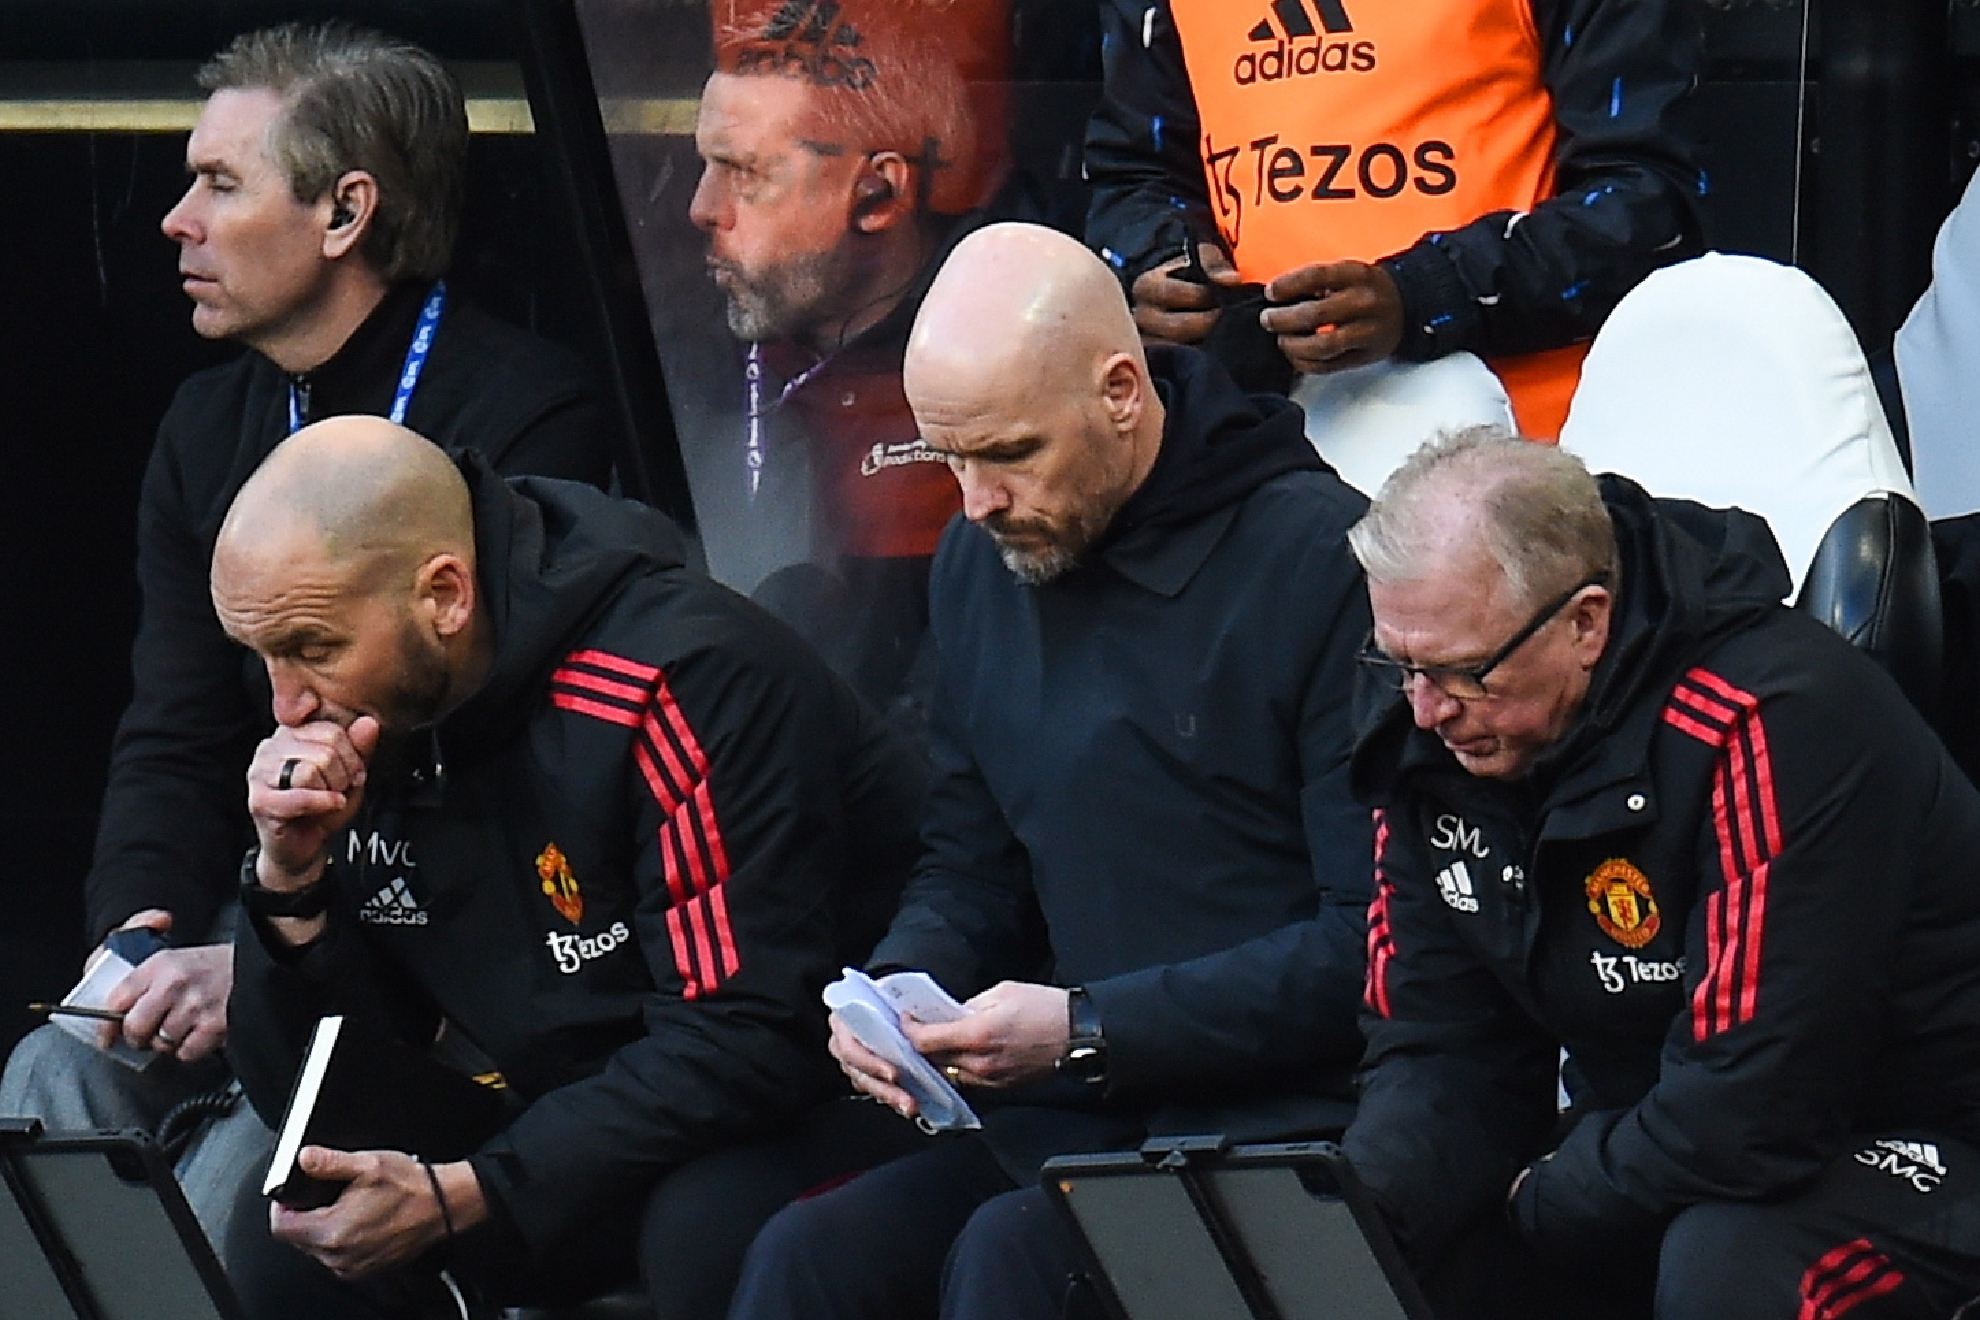 Ten Hag, with Manchester United.